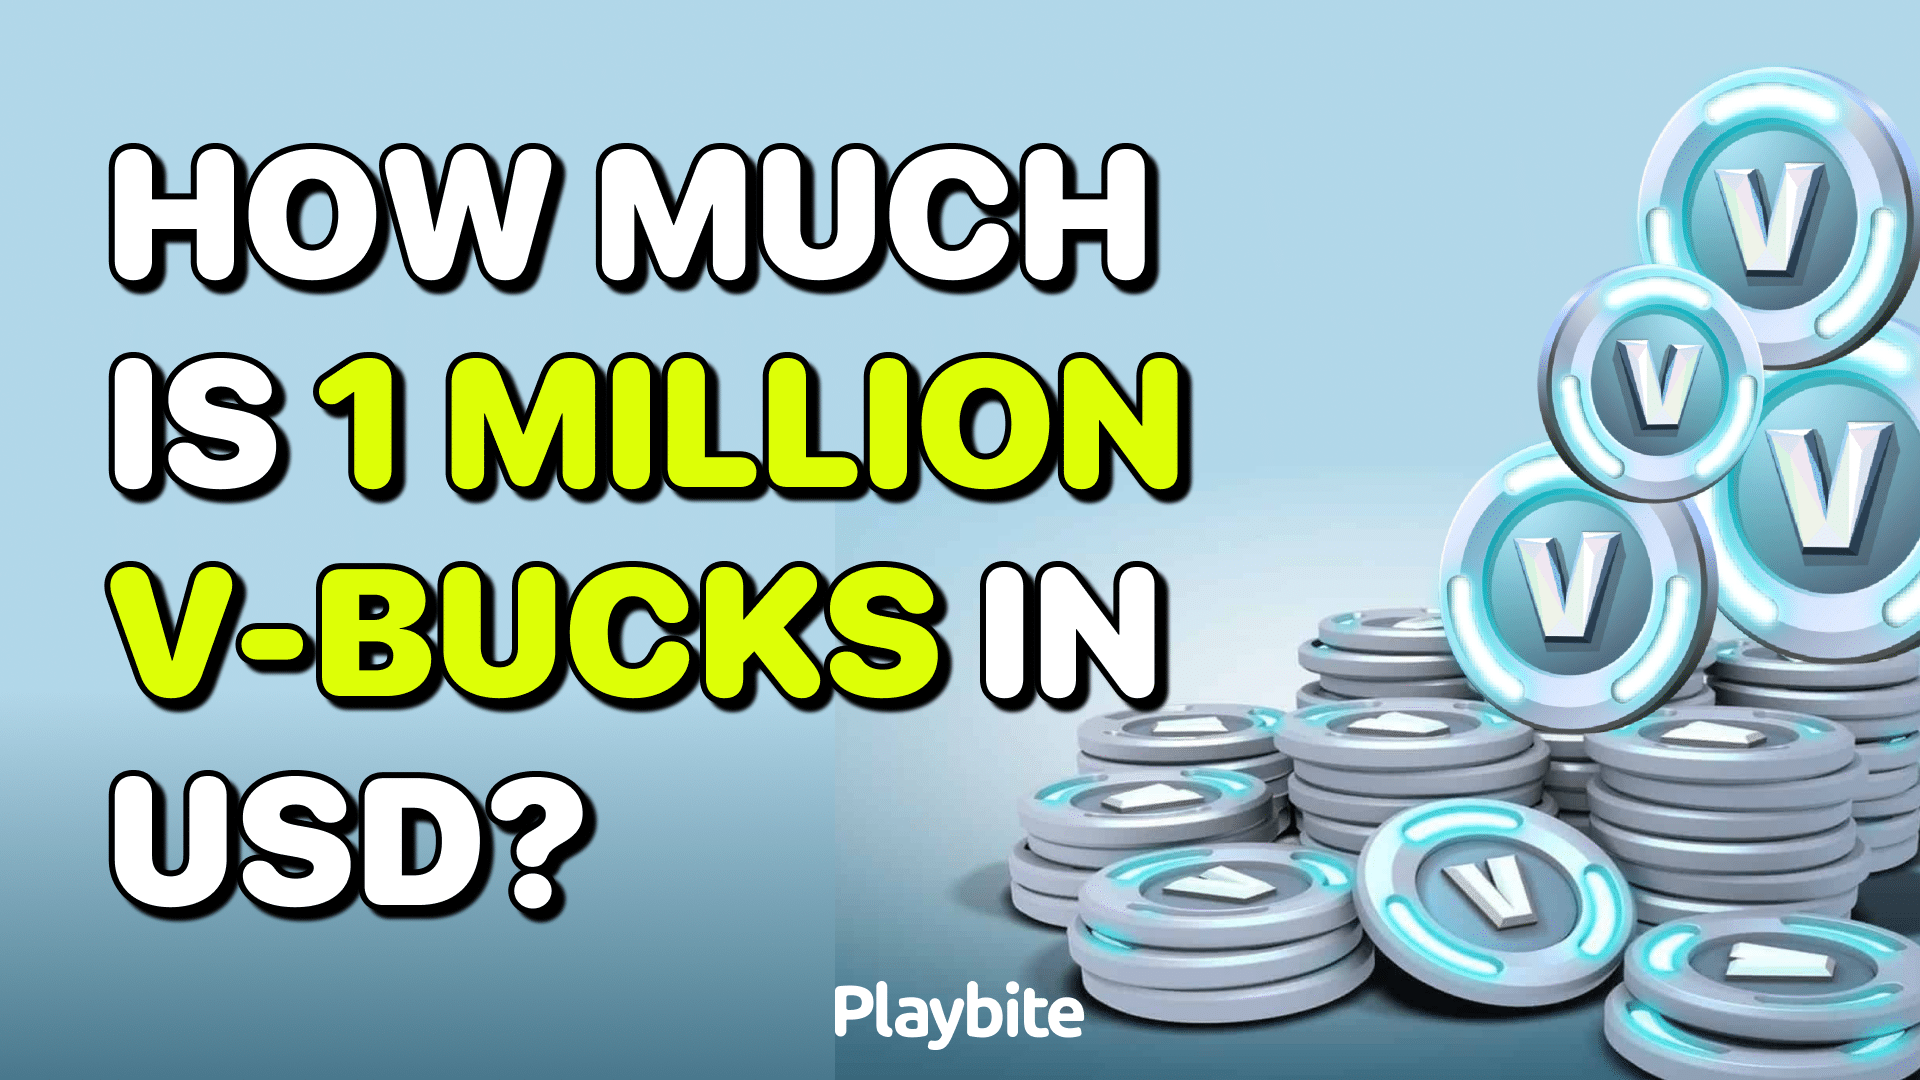 How Much Is 1 Million V-Bucks In USD - Playbite